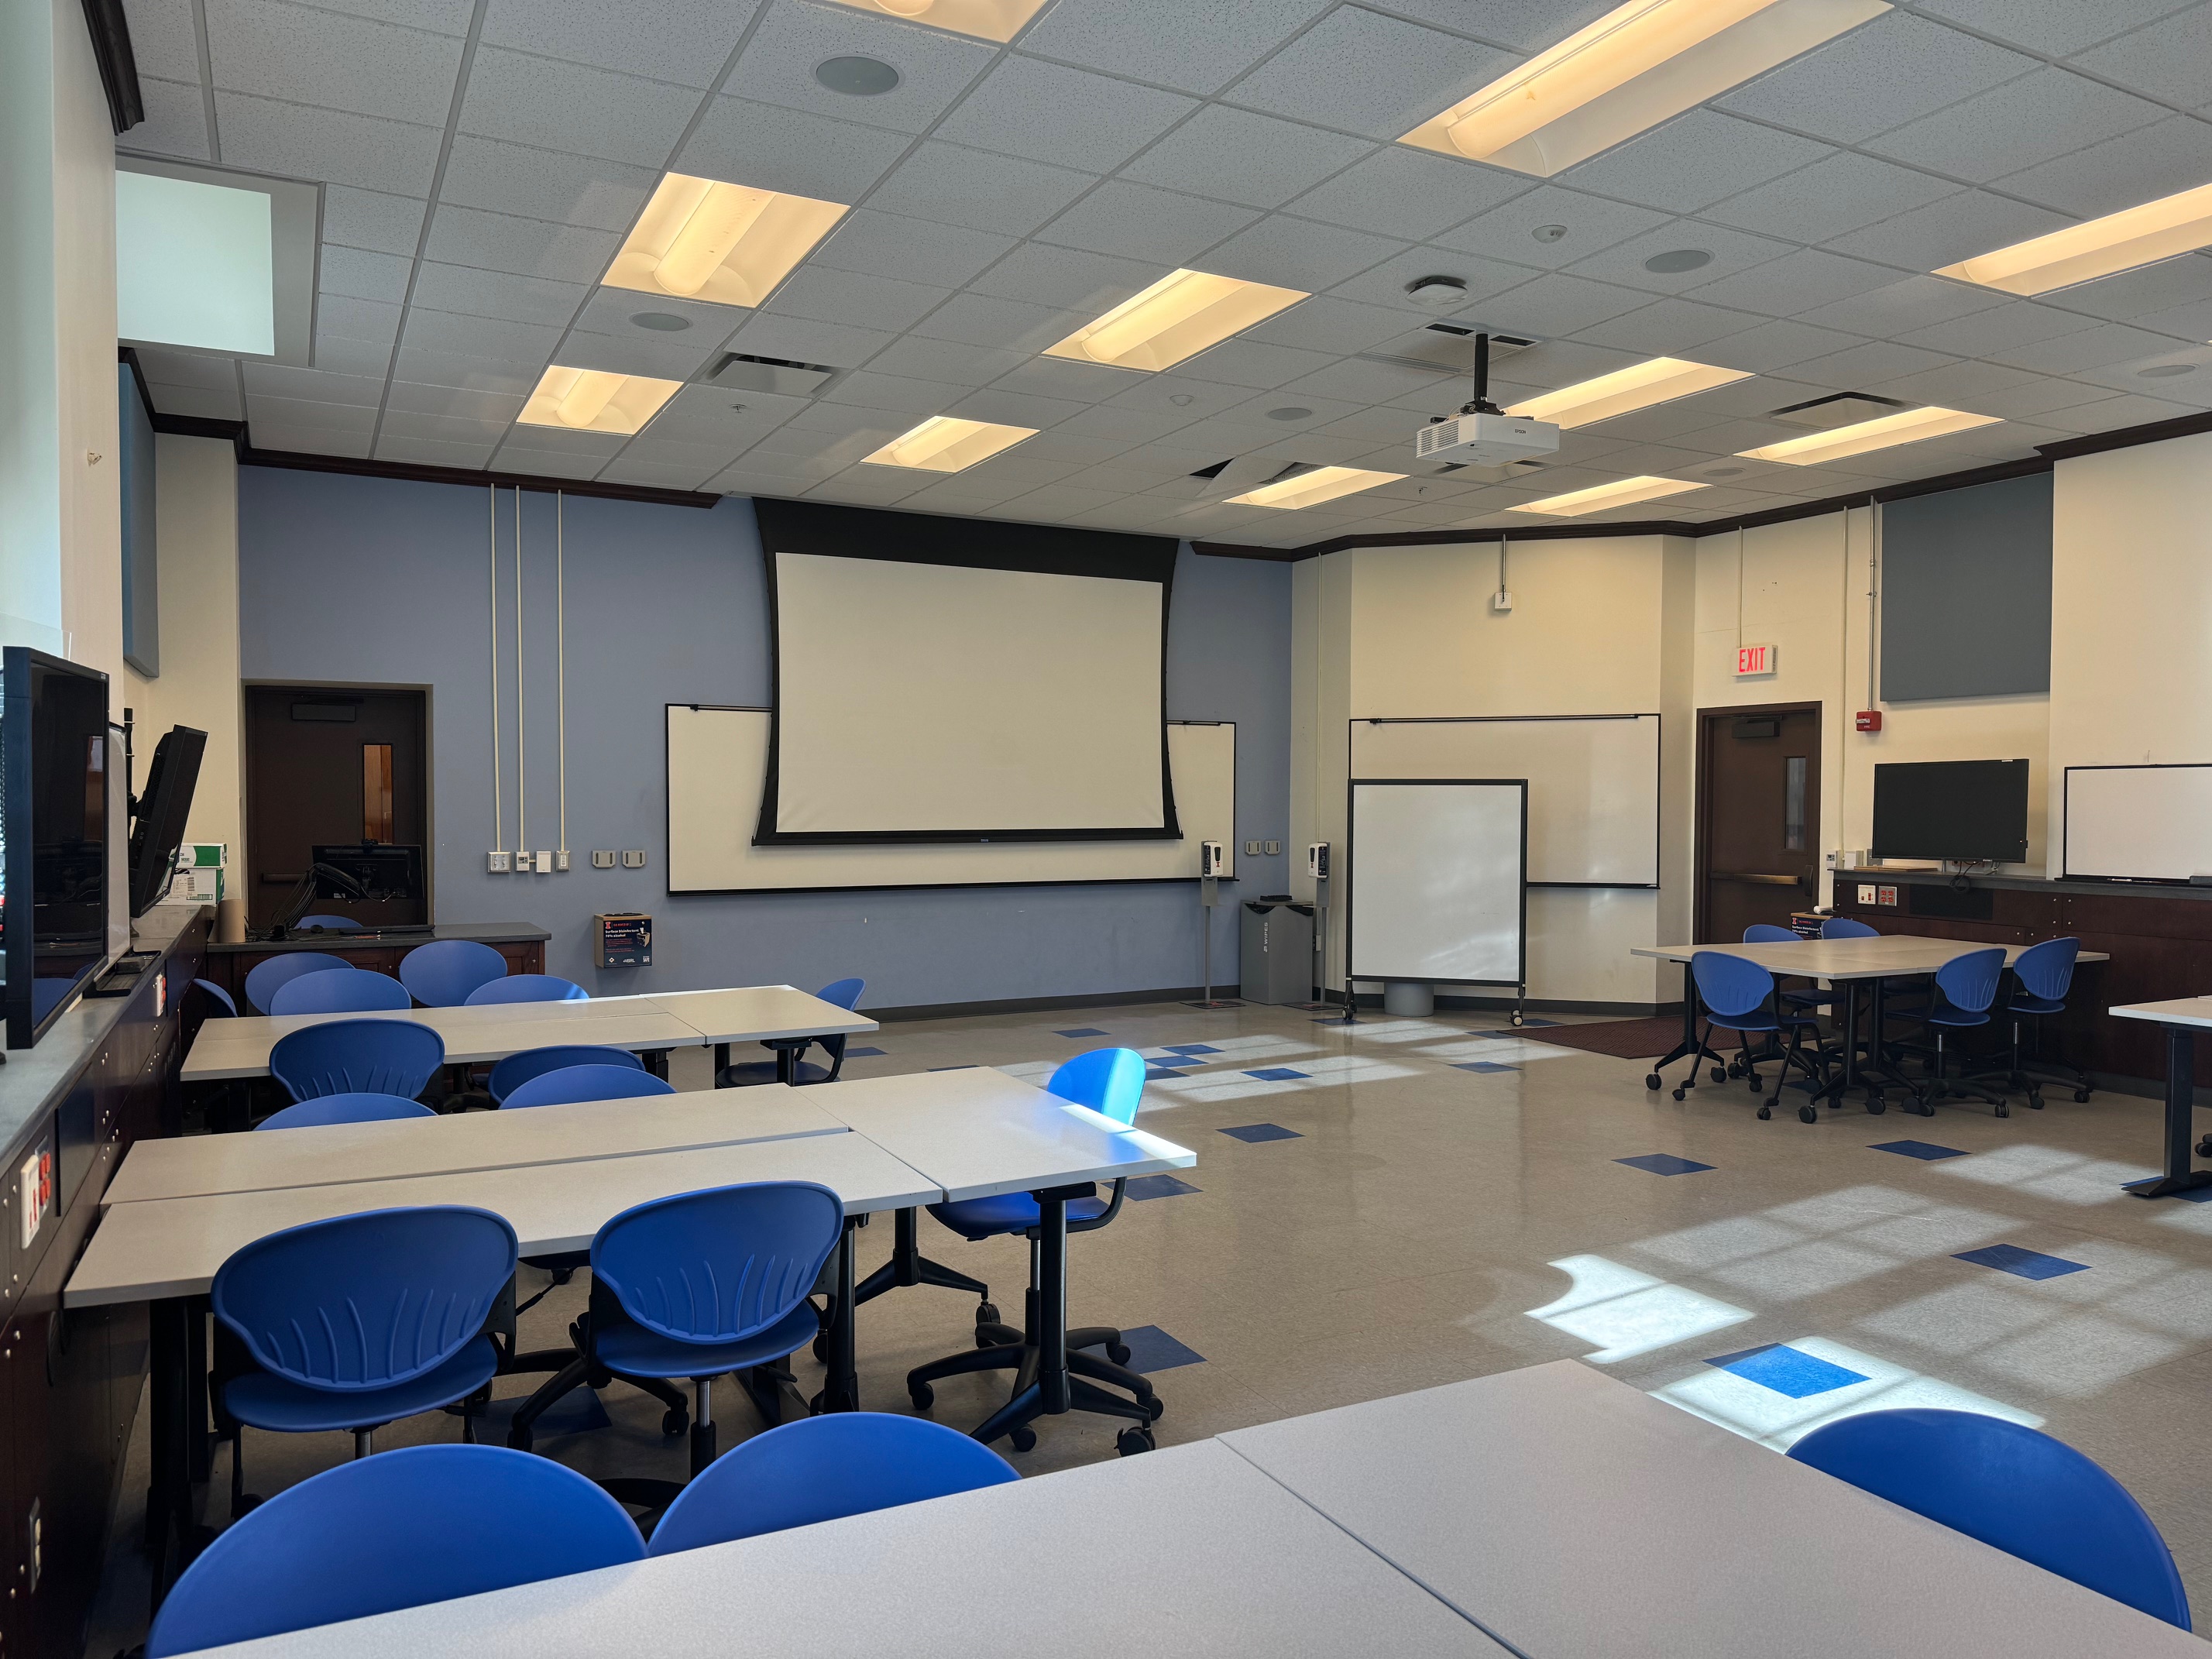 A view of the classroom with movable tables and chairs, white boards, and LCD monitors at student stations.